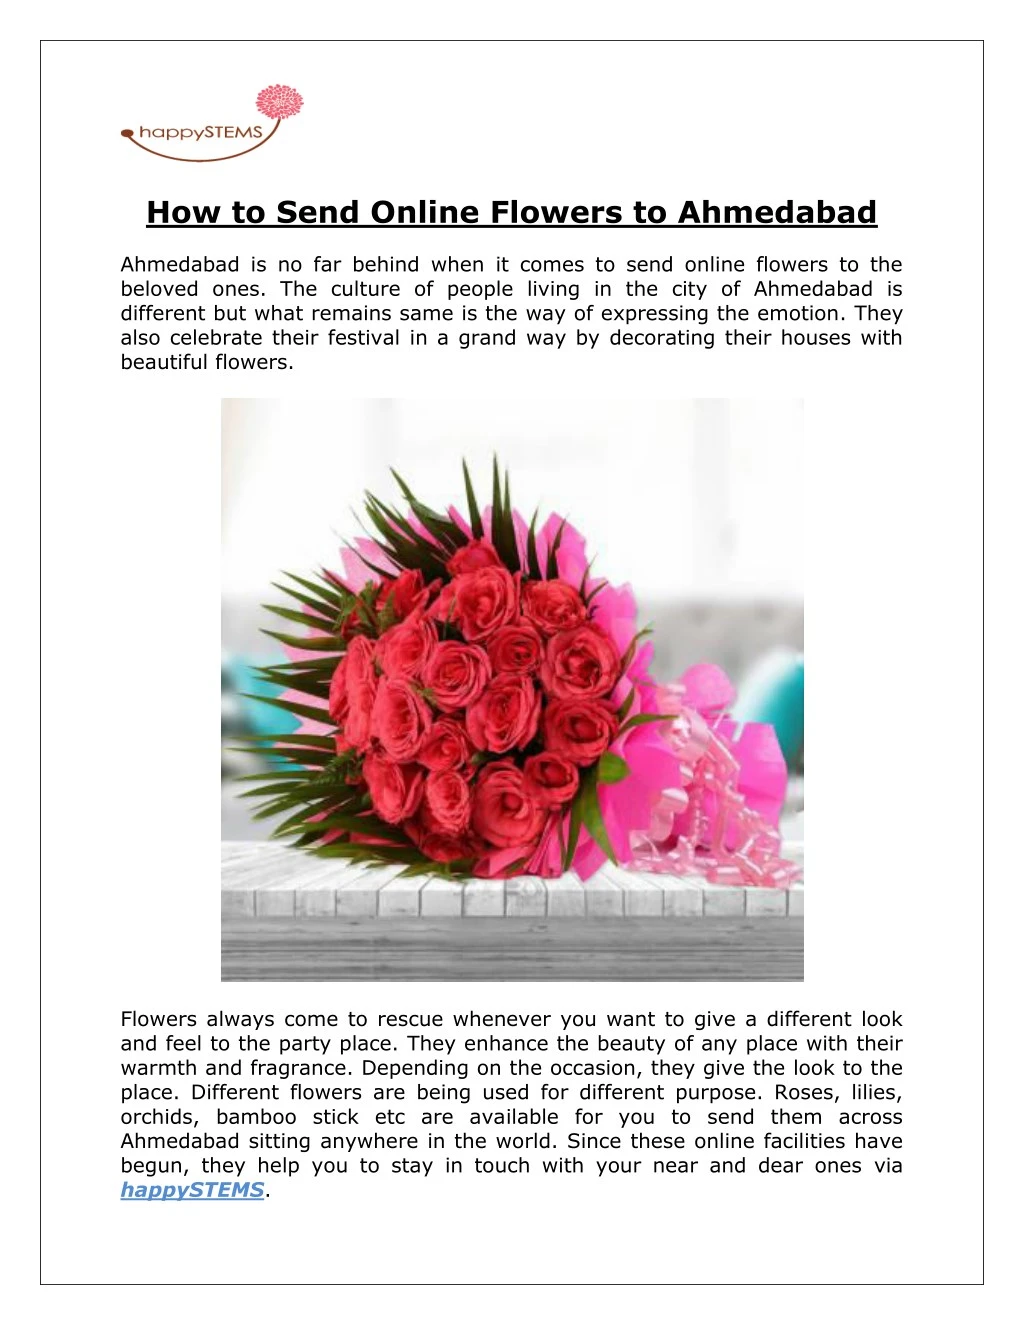 how to send online flowers to ahmedabad